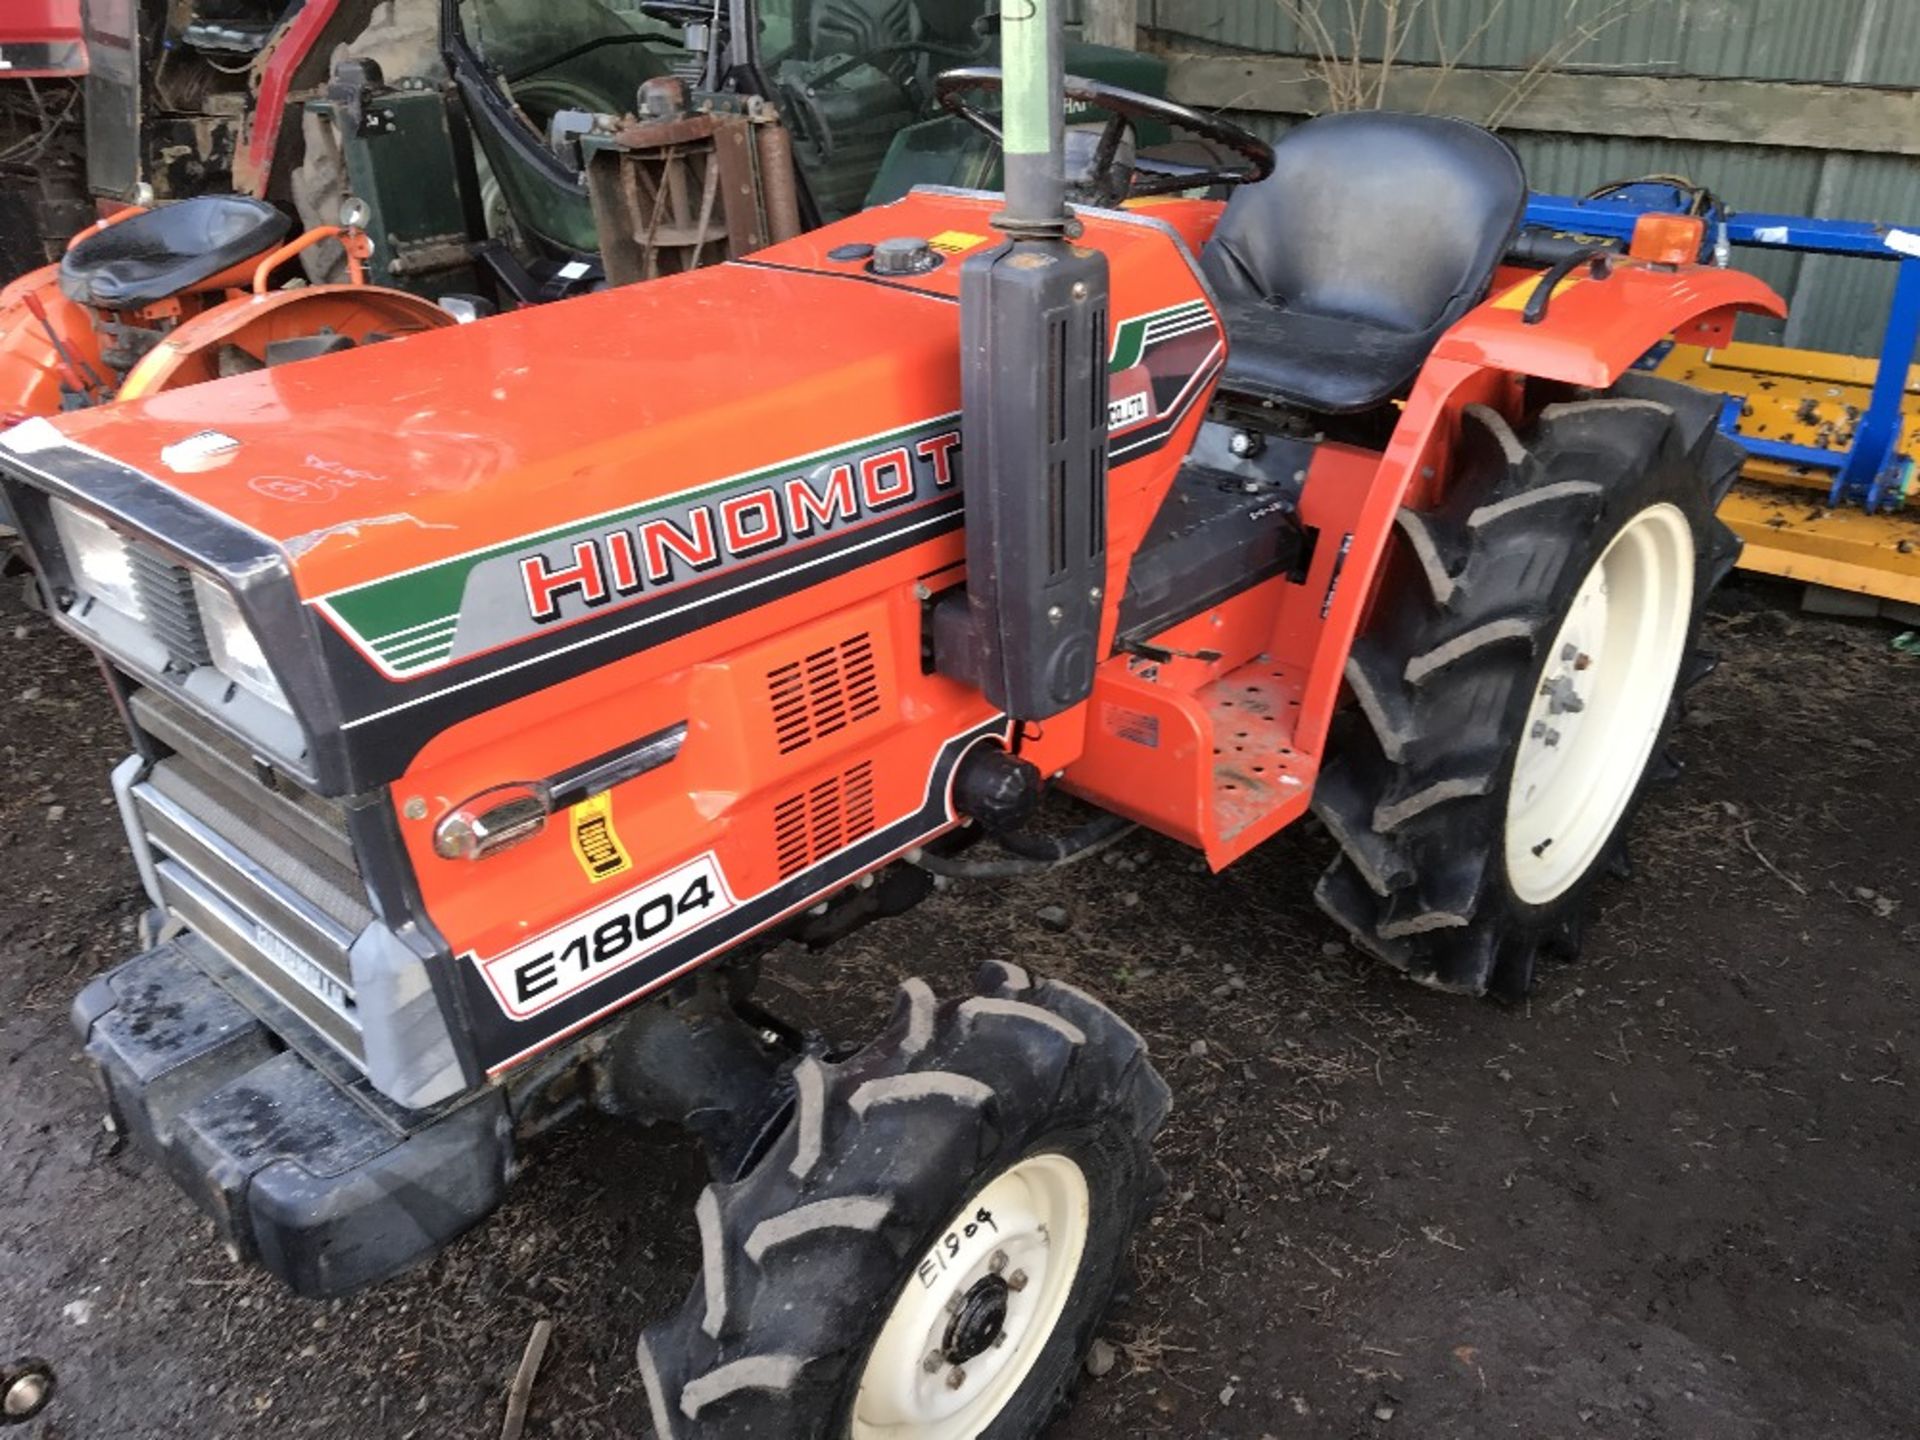 HINOMOTO E1804 4WD COMPACT TRACTOR SN:0679 WHEN TESTED WAS SEEN TO RUN, DRIVE, STEER AND BRAKE